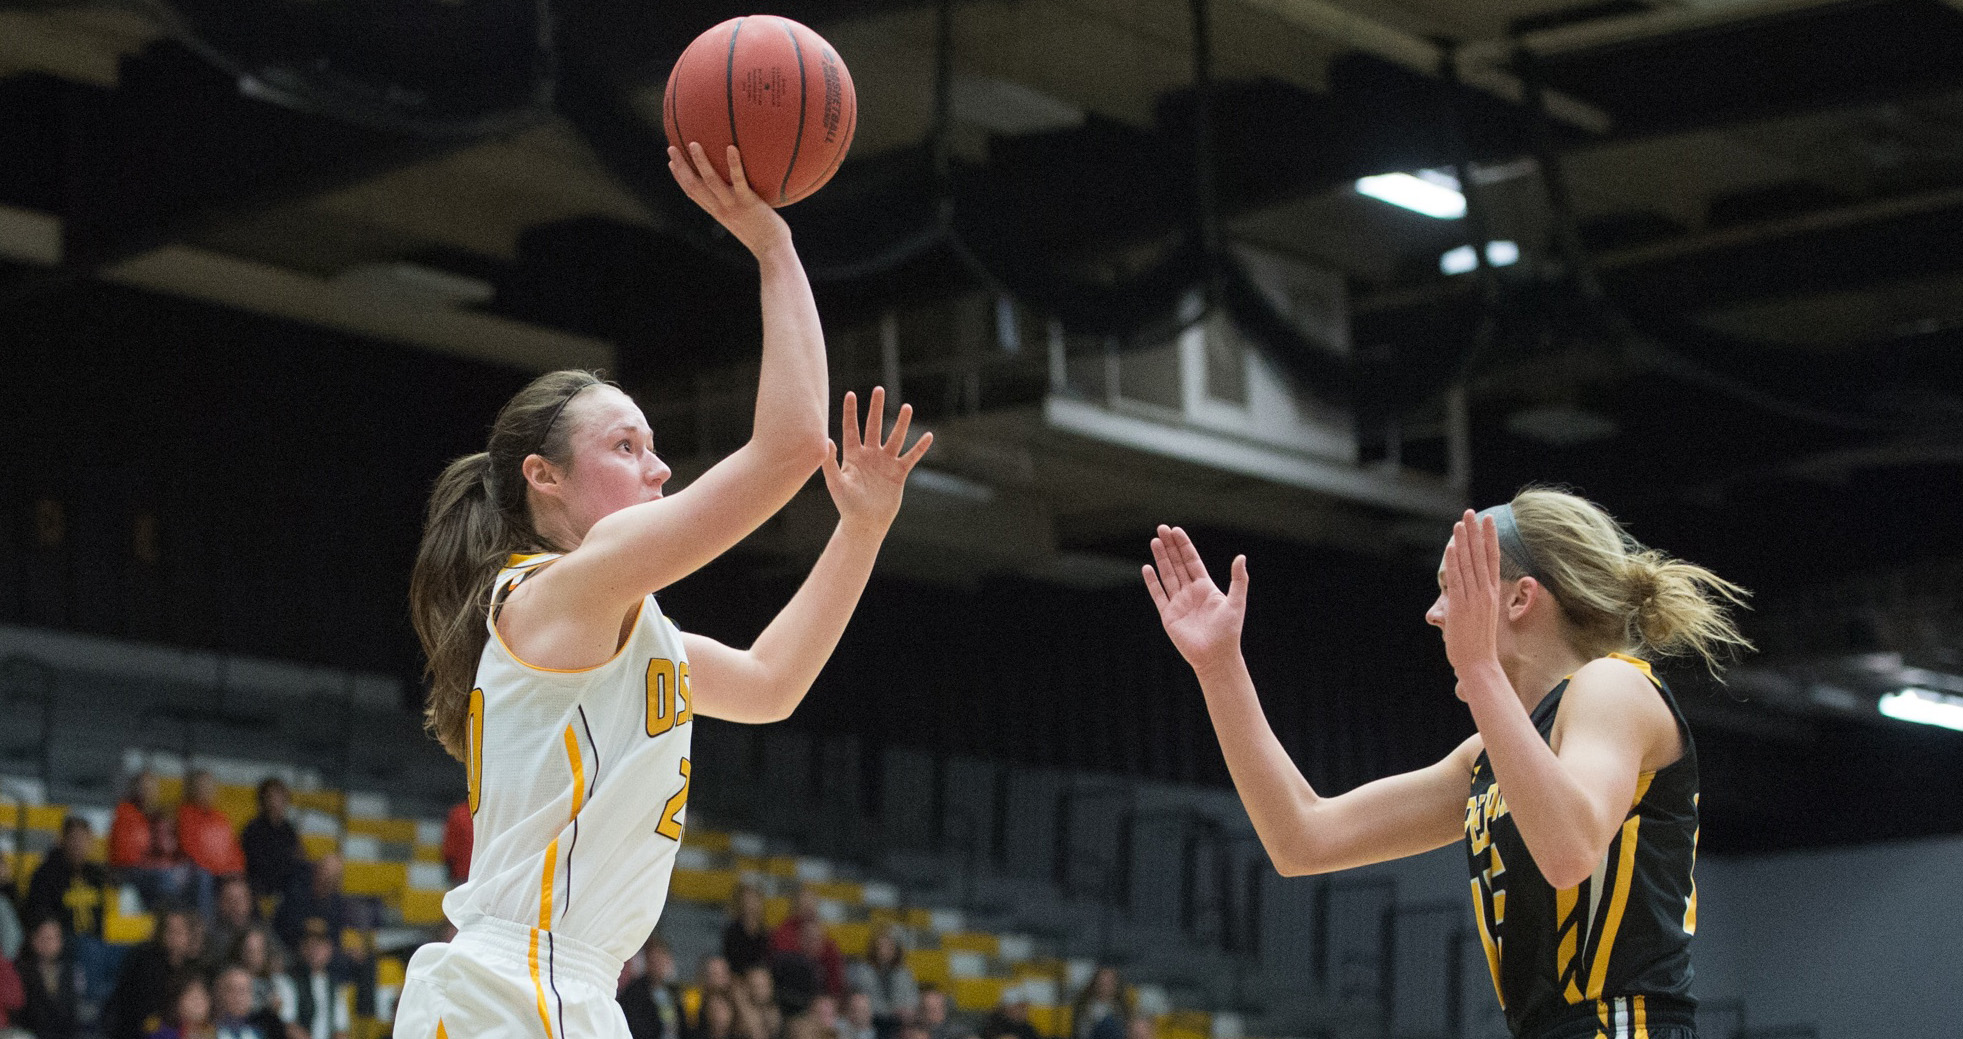 Ashley Neustifter scored 10 points, including a pair of 3-point baskets, against the Yellowjackets.